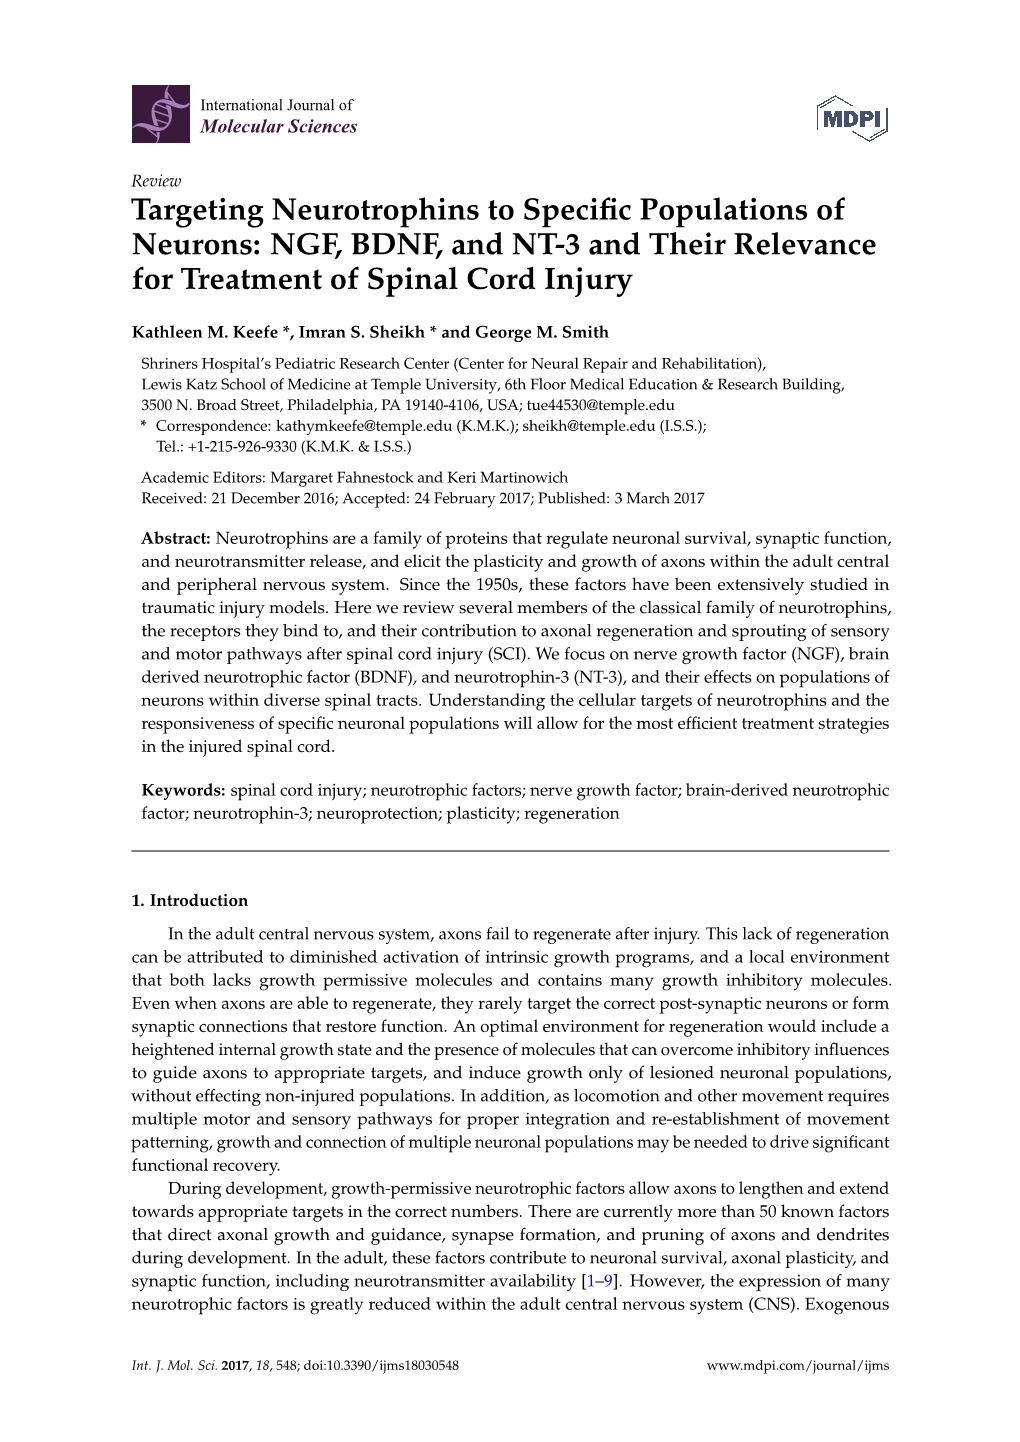 NGF, BDNF, and NT-3 and Their Relevance for Treatment of Spinal Cord Injury